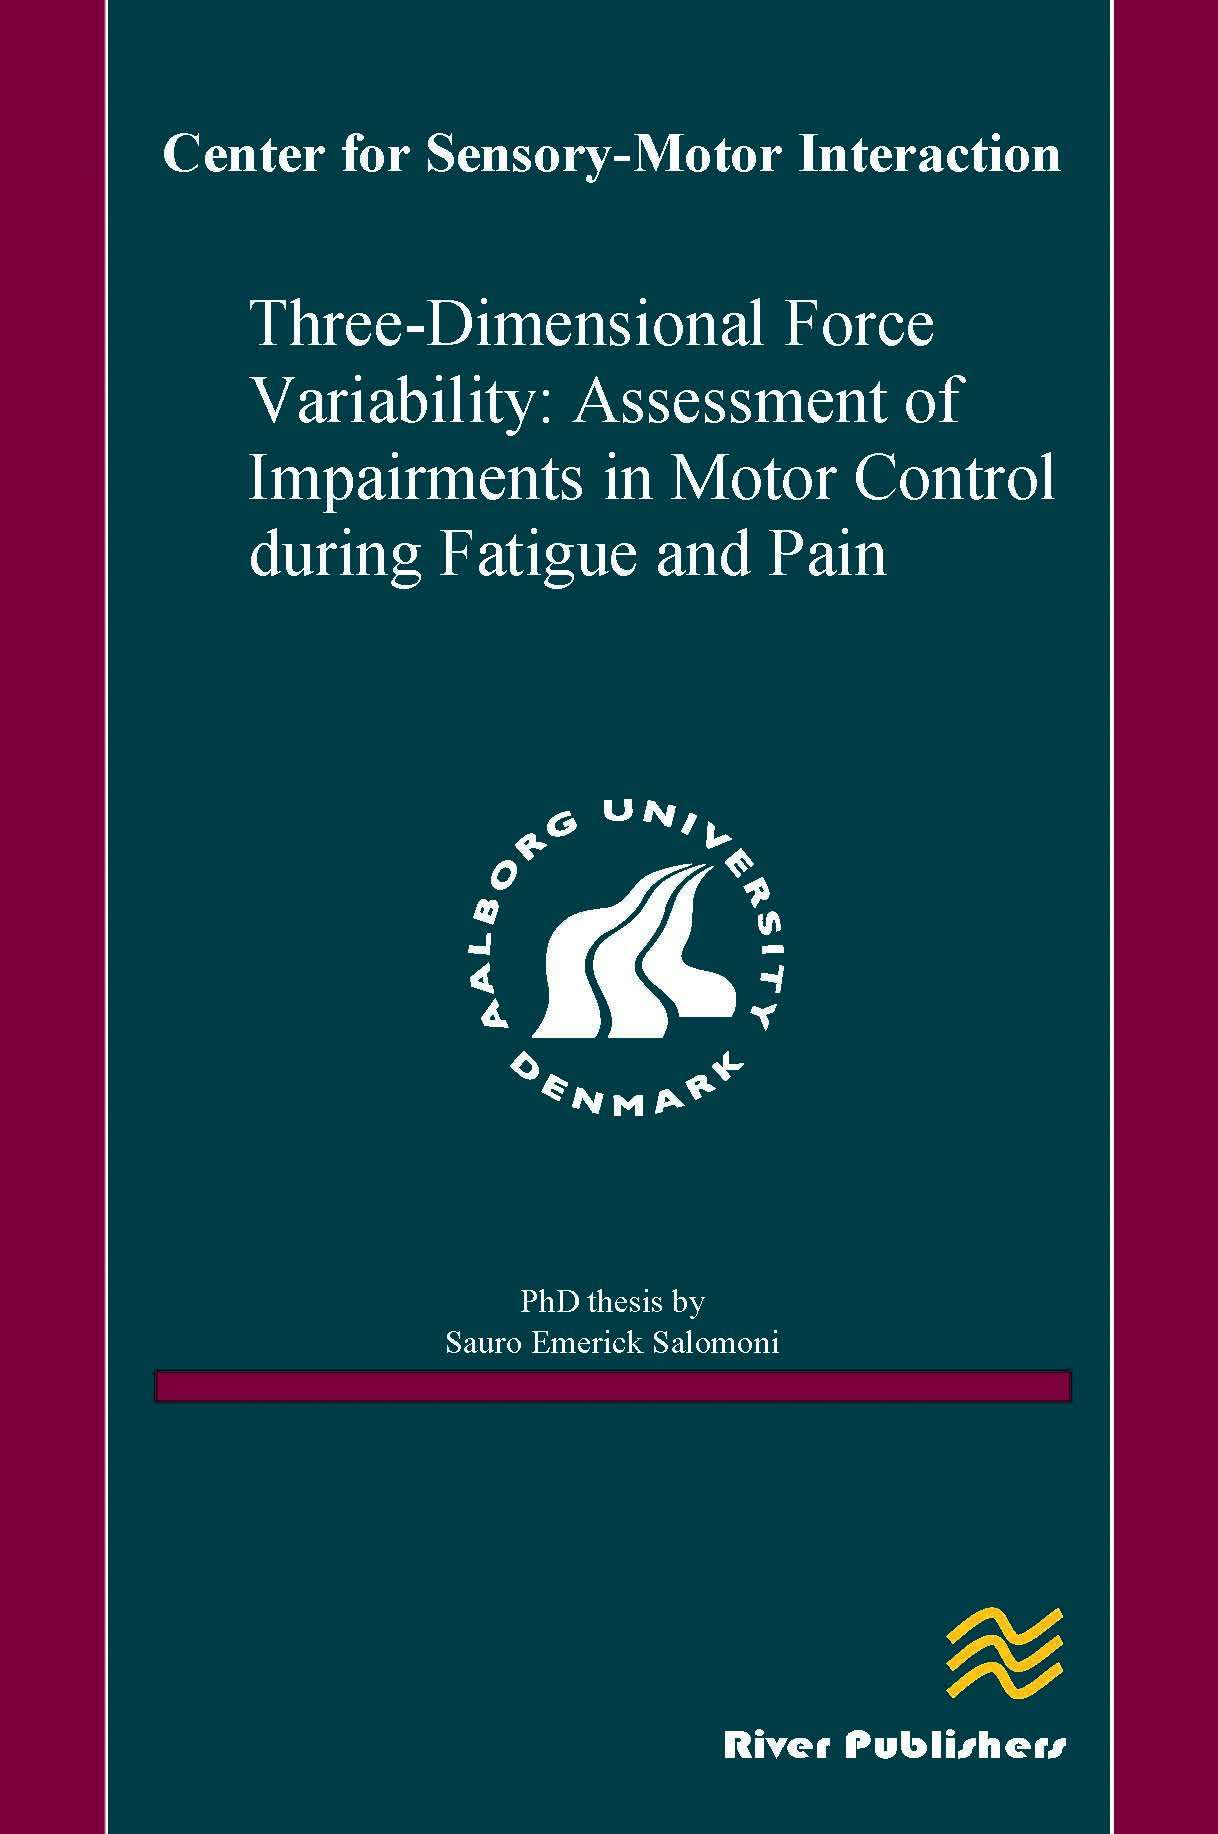 Three-Dimensional Force Variability: Assessment of Impairments in Motor Control during Fatigue and Pain